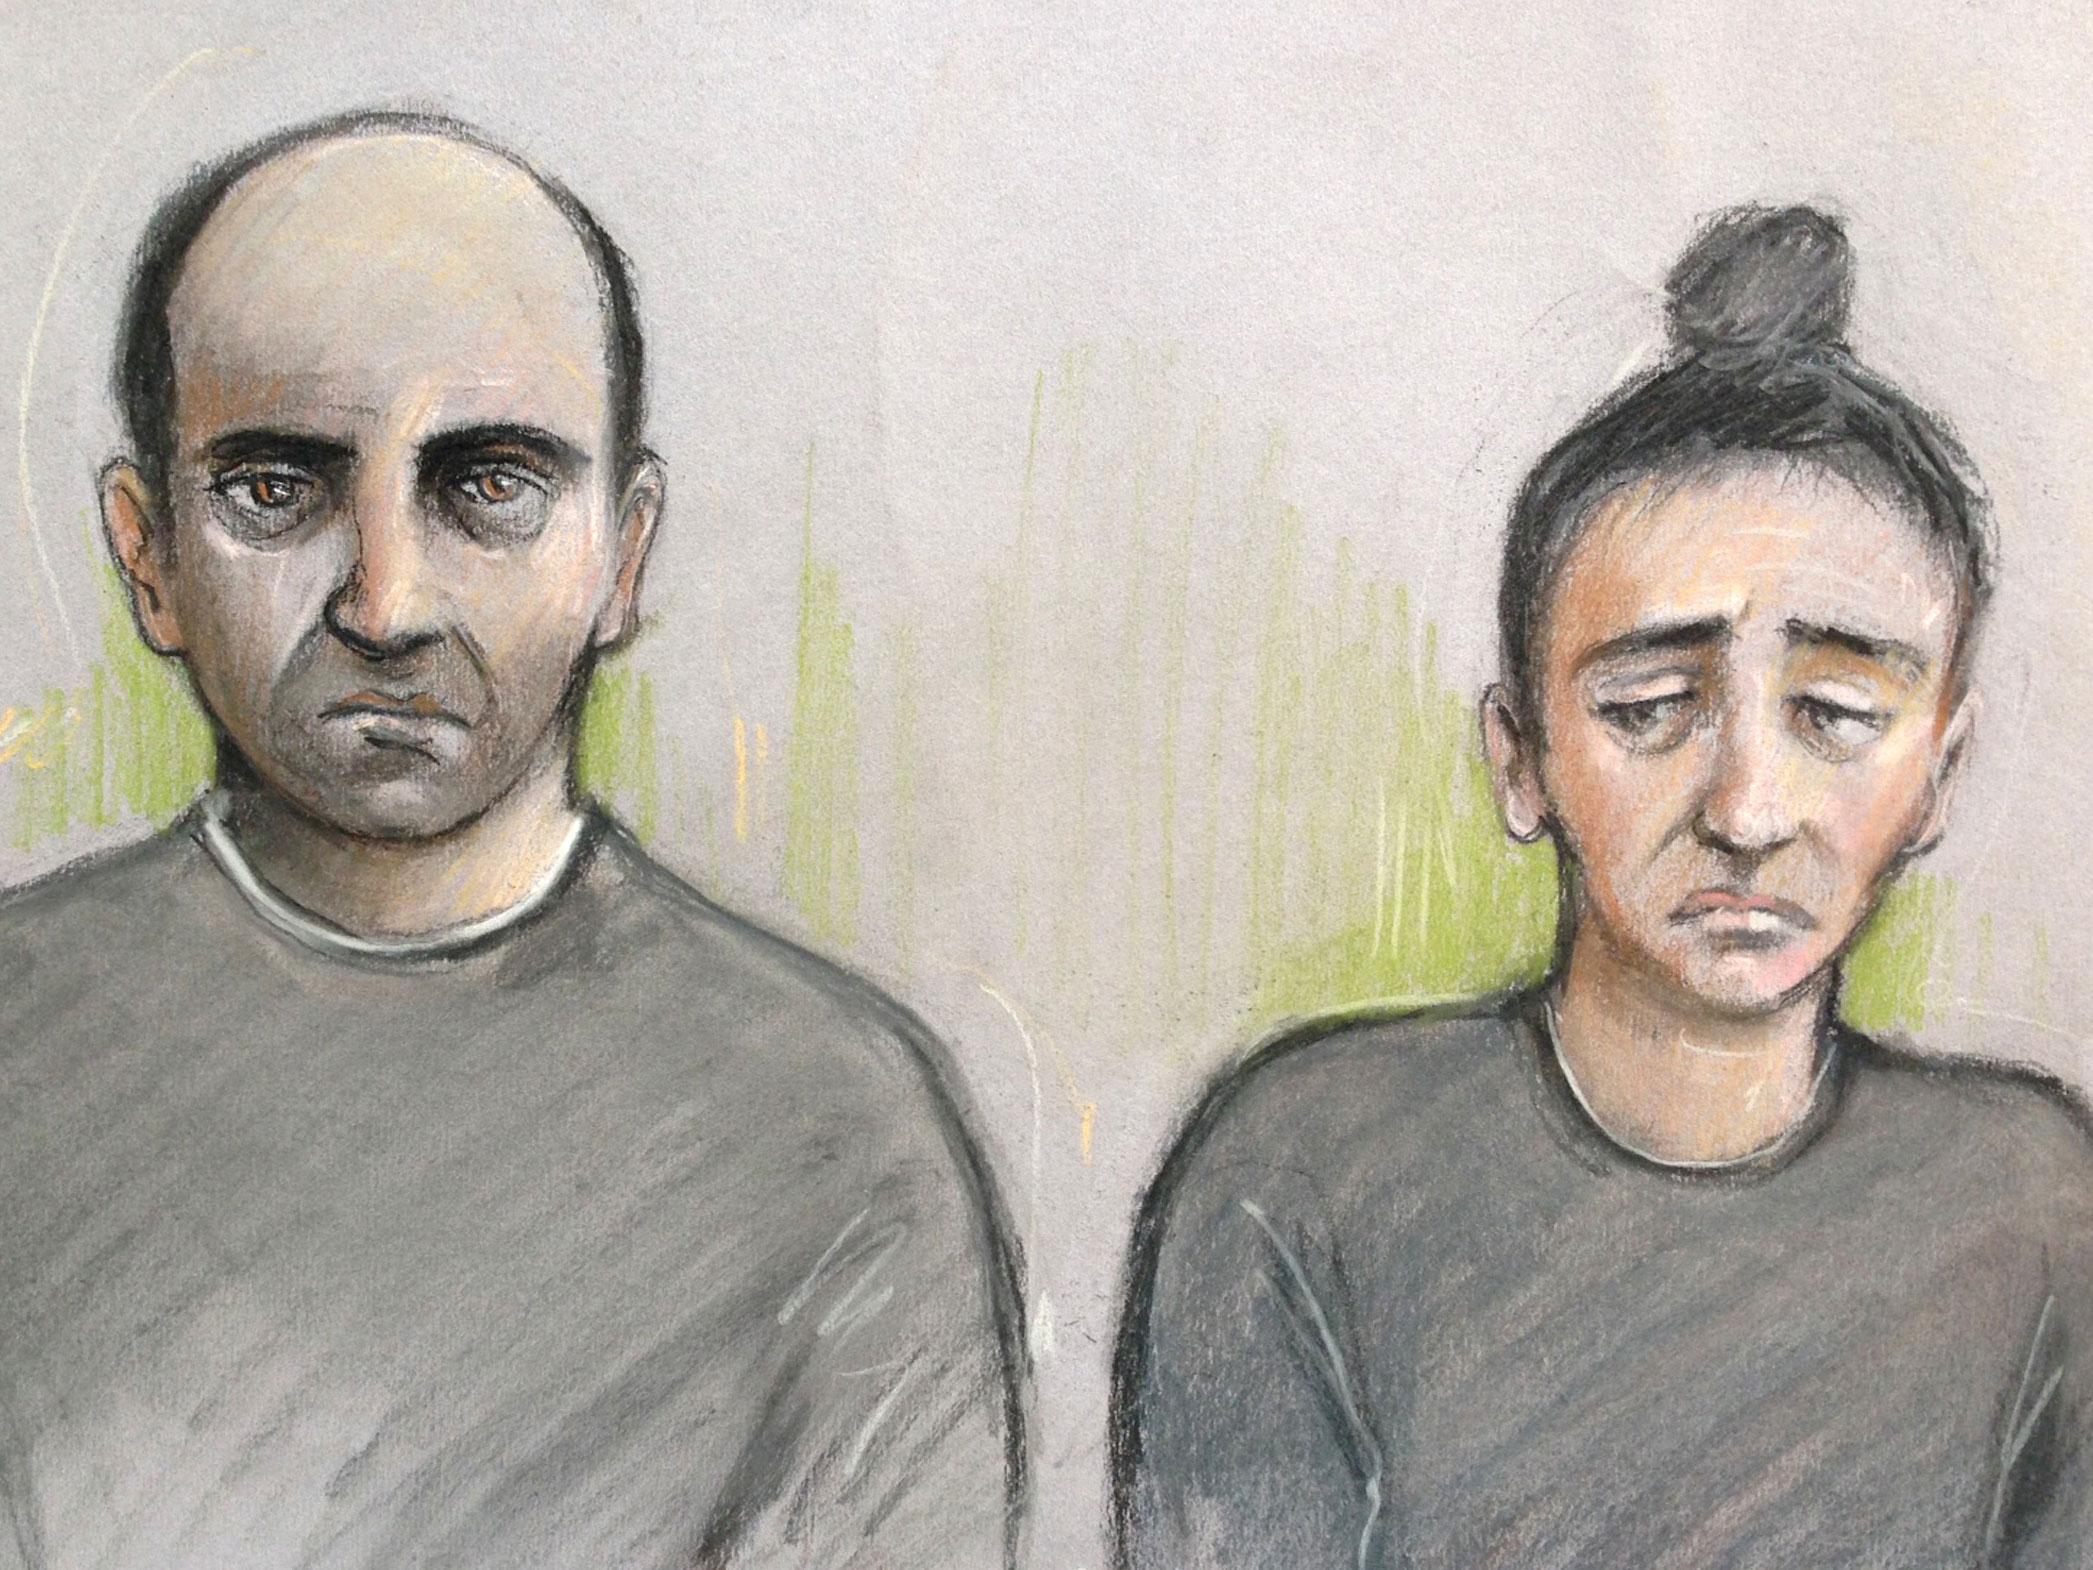 Court artist sketch of Ouissem Medouni 40, and his partner Sabrina Kouider, 34, appearing at the Old Bailey in London at an earlier hearing